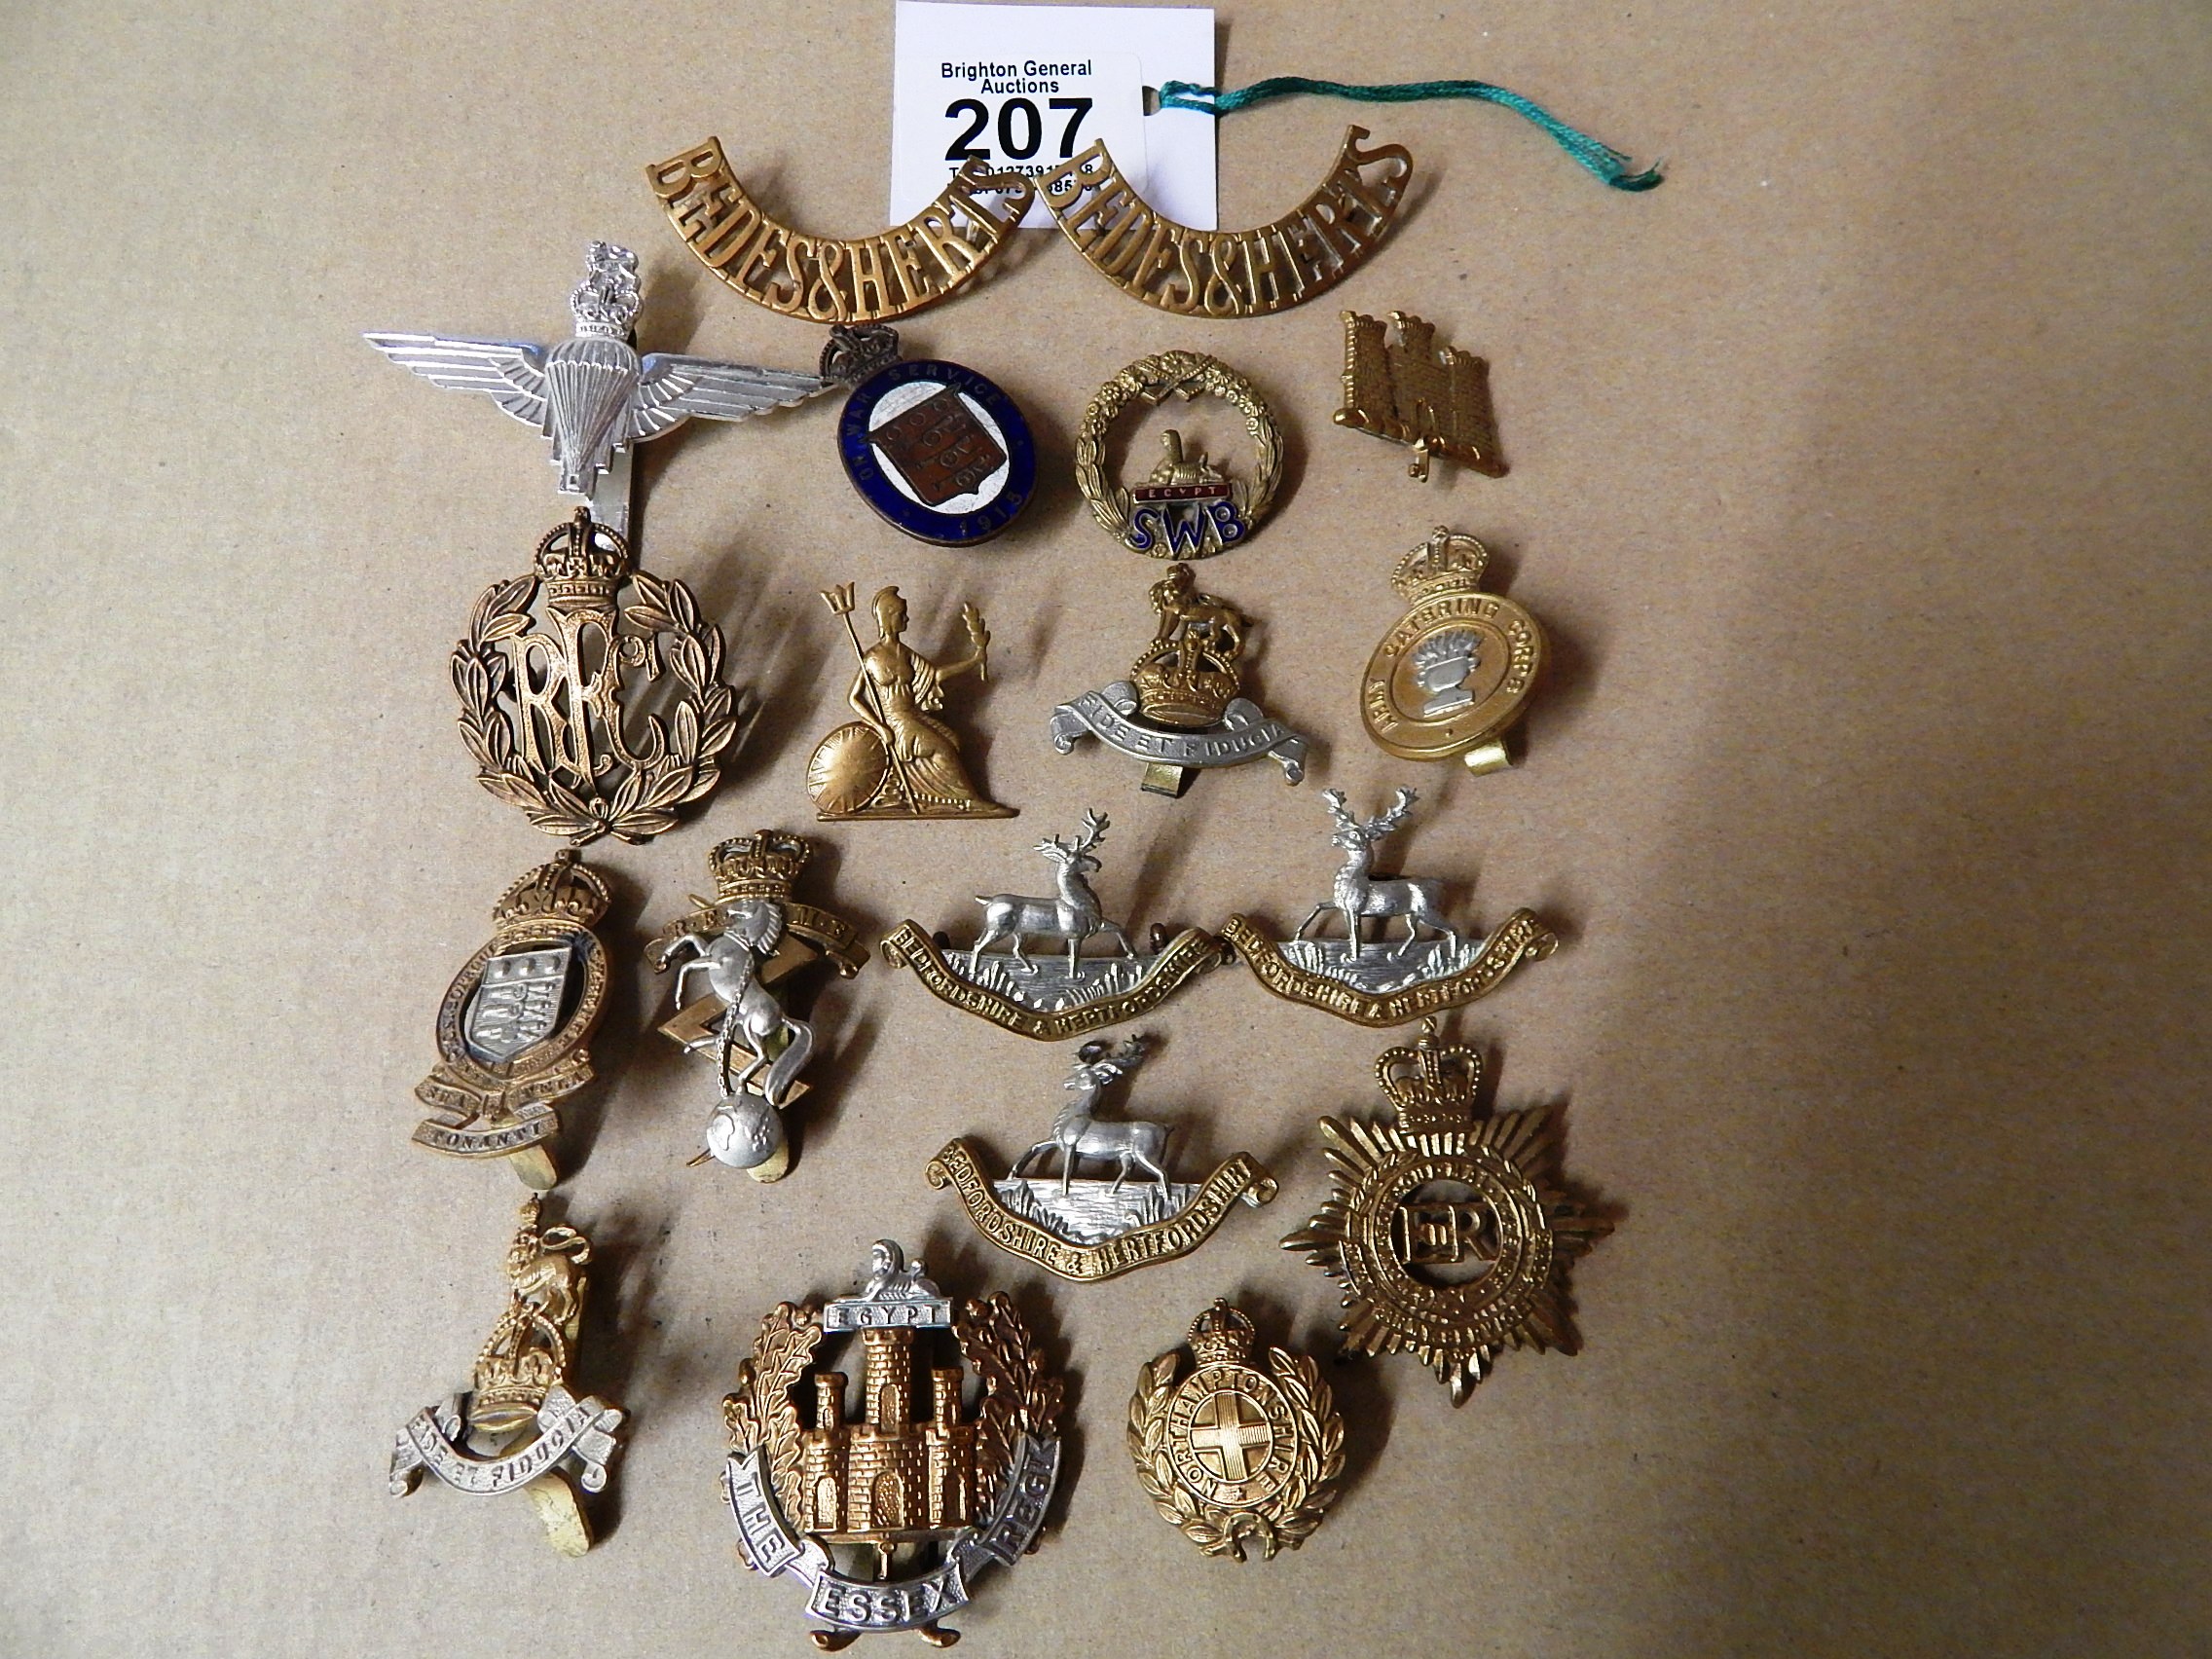 19 MAINLY MILITARY BADGES